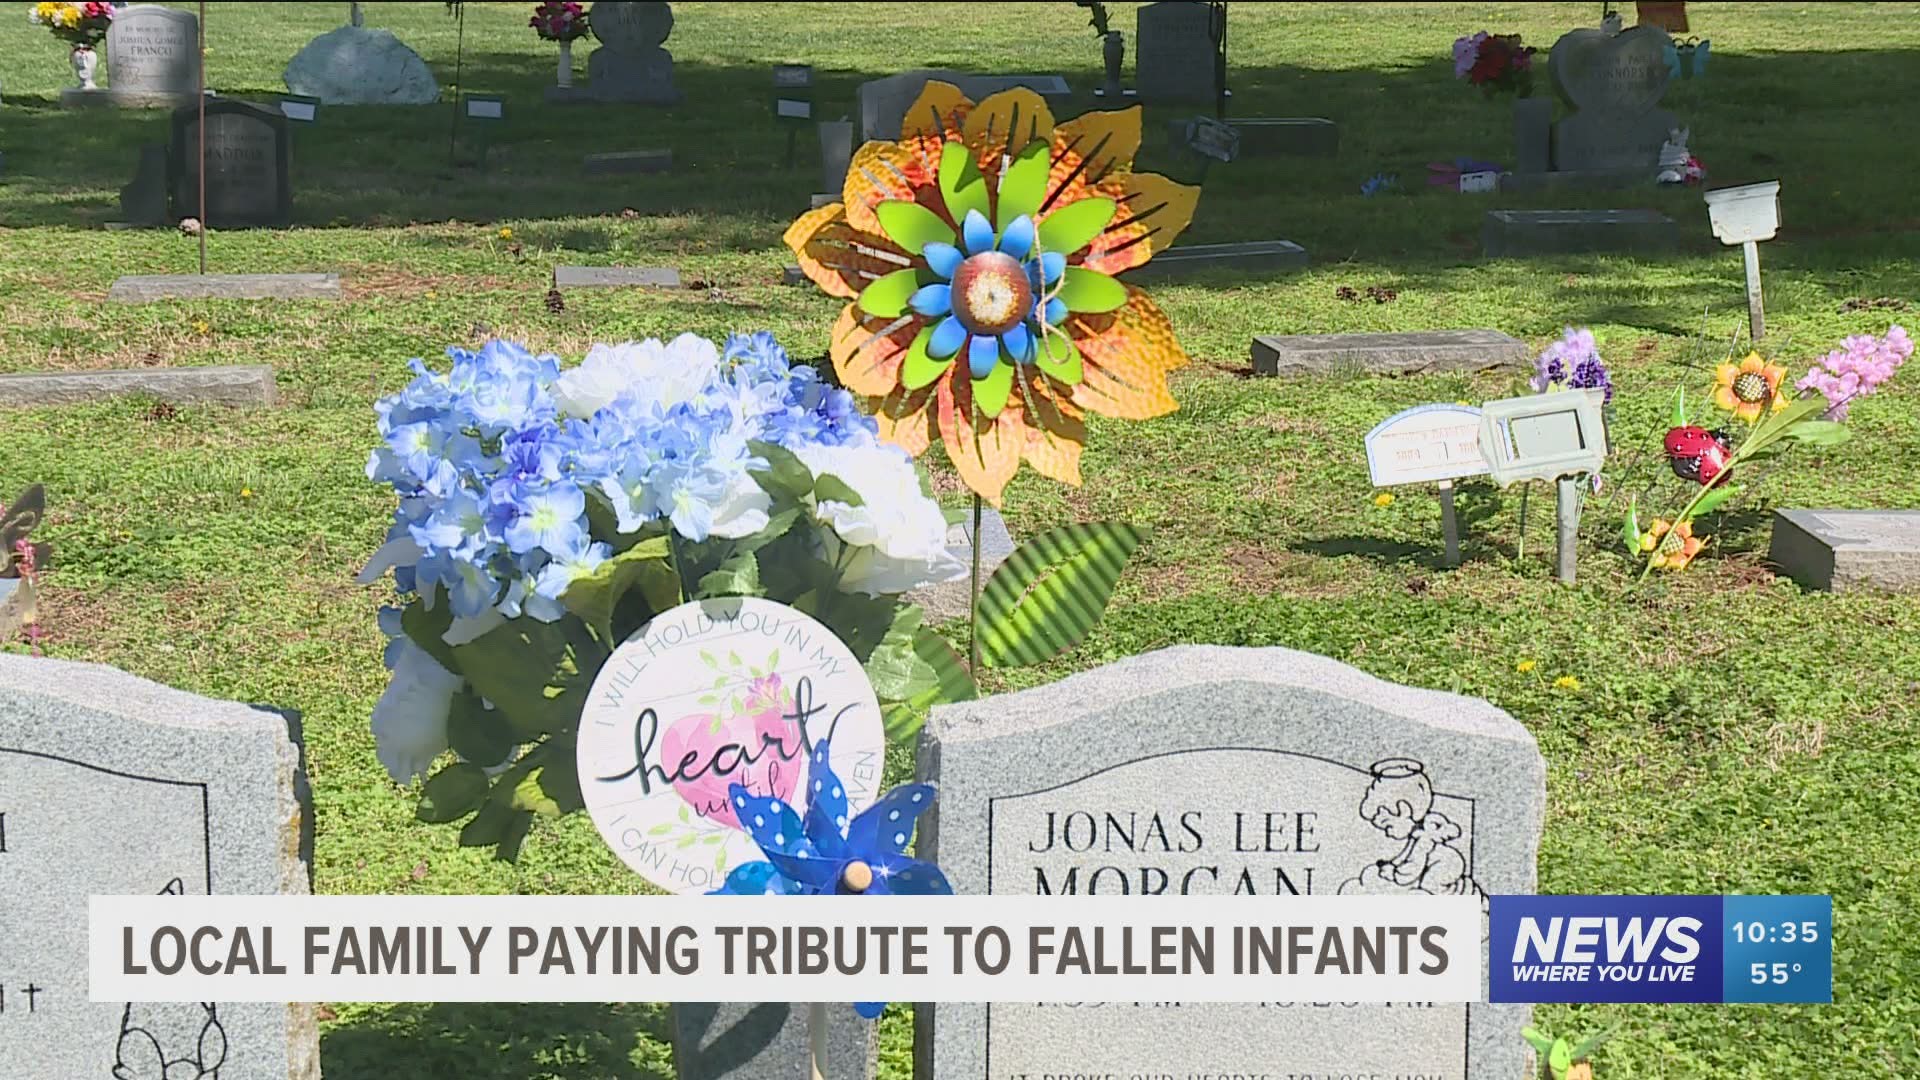 Brandi Morgan and her family are having a fundraiser to help purchase gravestones for babies who have unmarked graves in the “Baby Land” cemetery in Rogers.